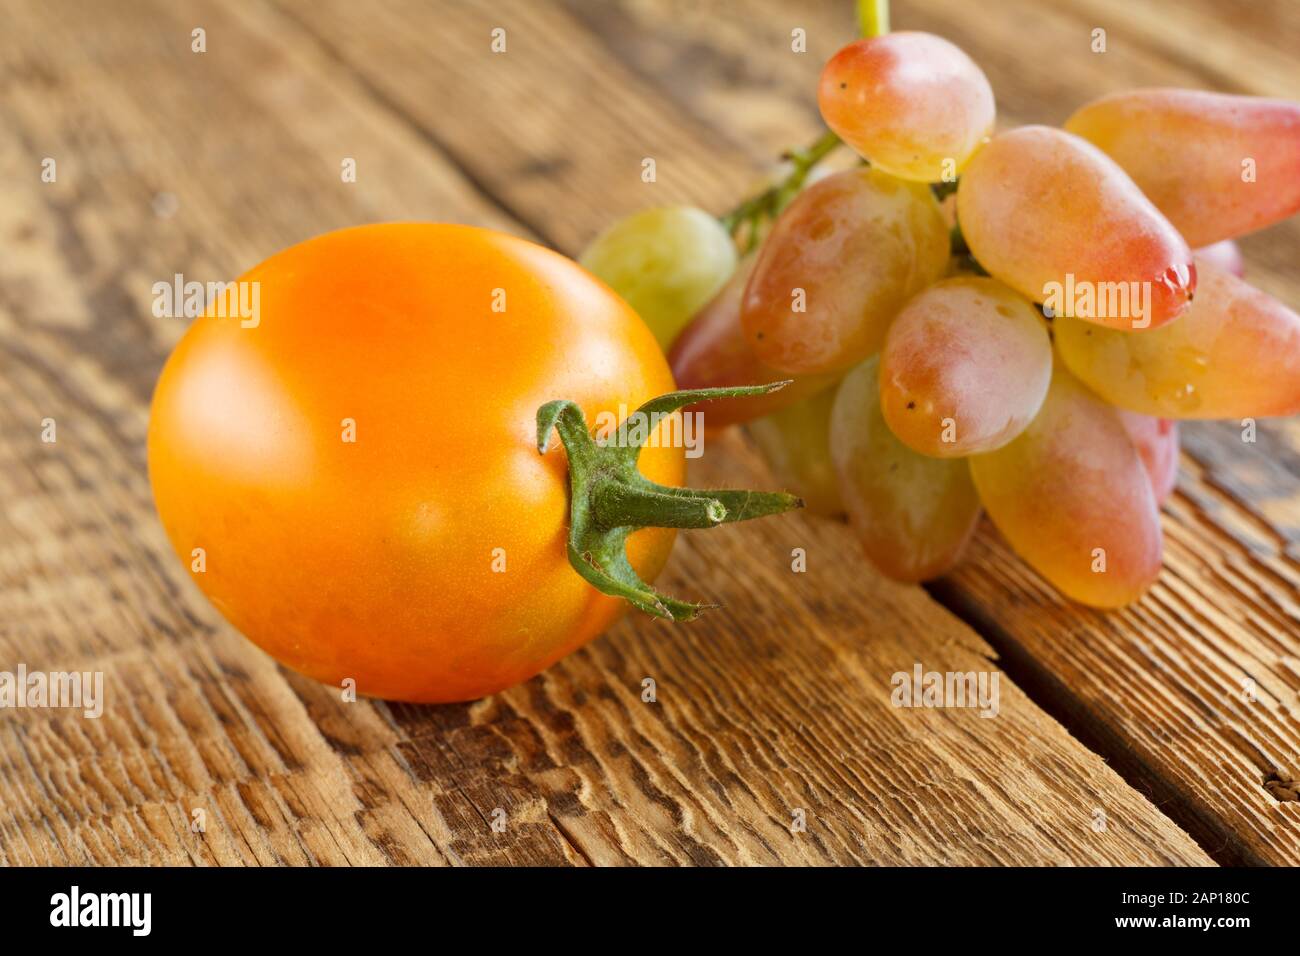 Close-up yellow tomato and bunch of grapes on wooden background. Shallow depth of field. Stock Photo